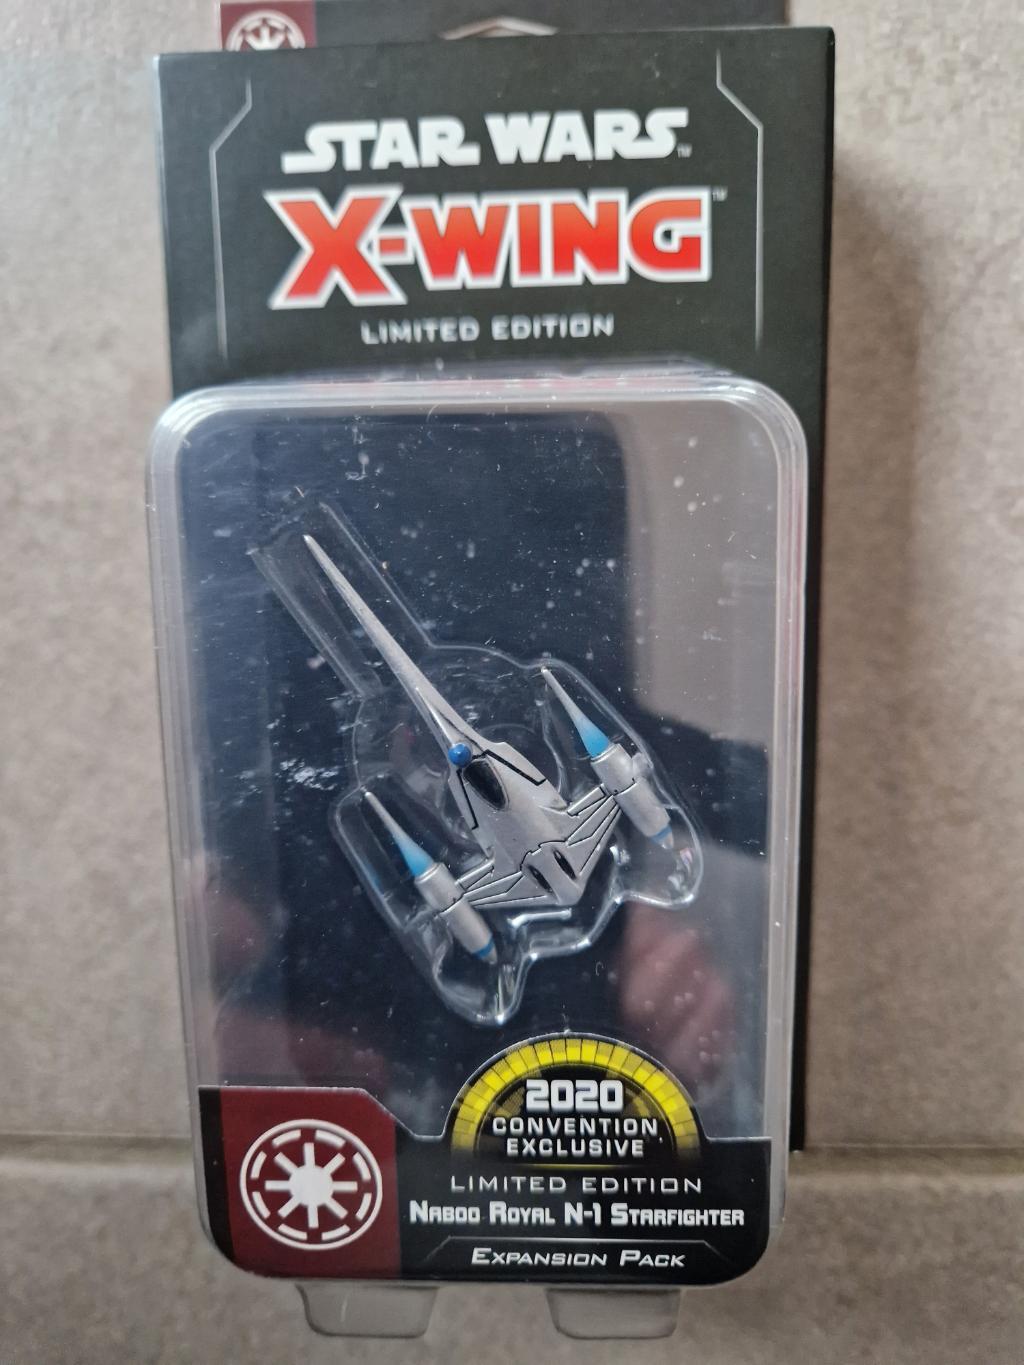 X-wing 2.0 - Le Jeu De Figurines - Limited Edition Naboo Royal N-1 Starfighter - 2020 Convention Exclusive